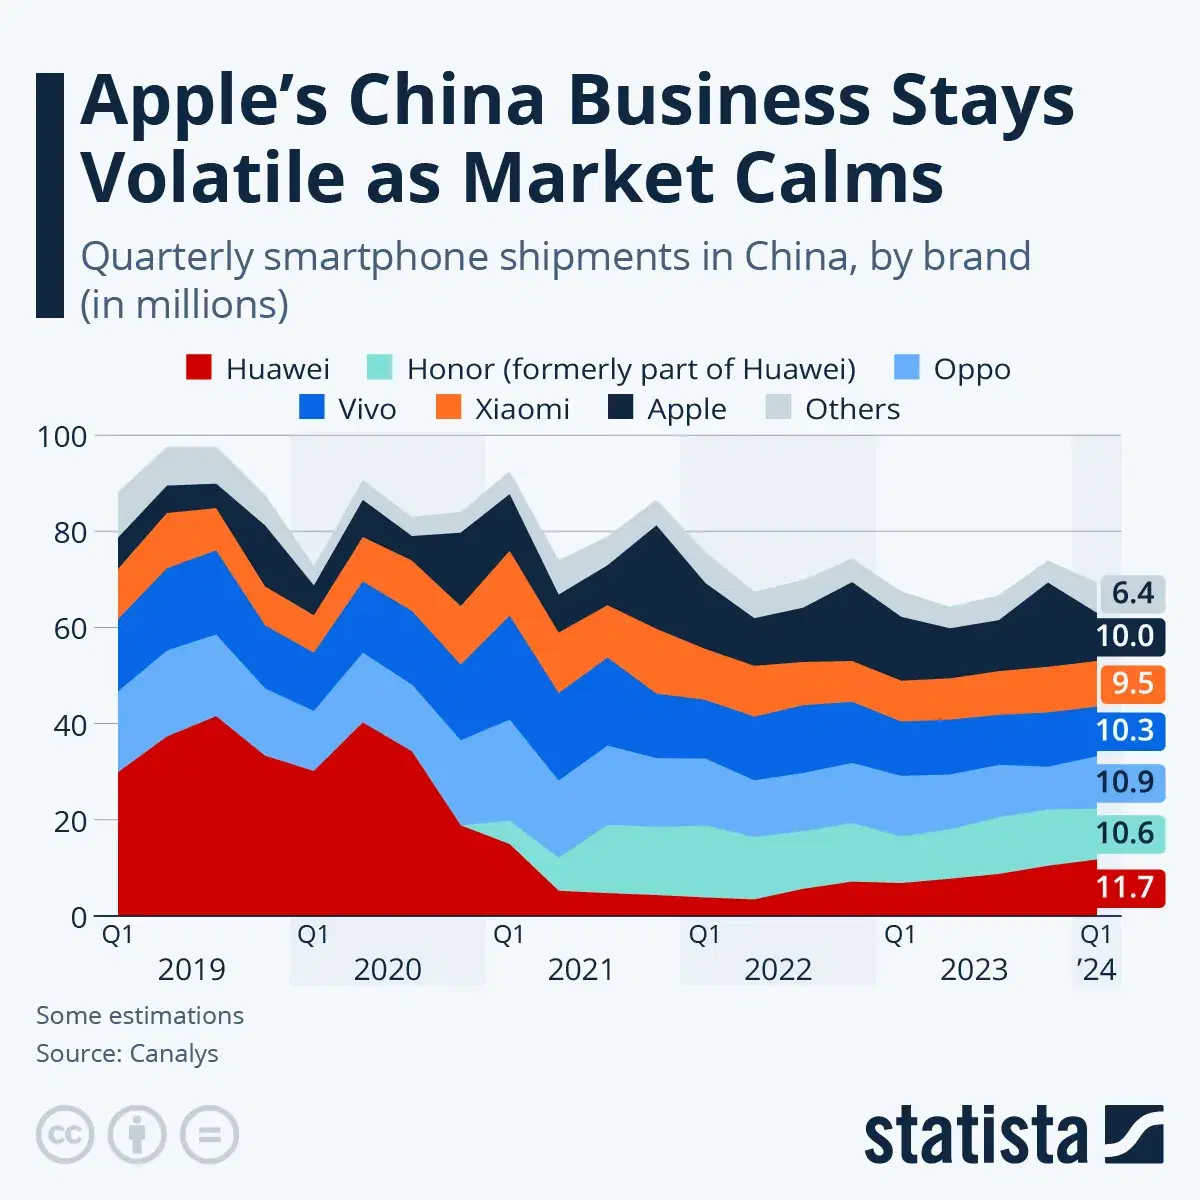 Apple's China Business Stays Volatile as Market Calms